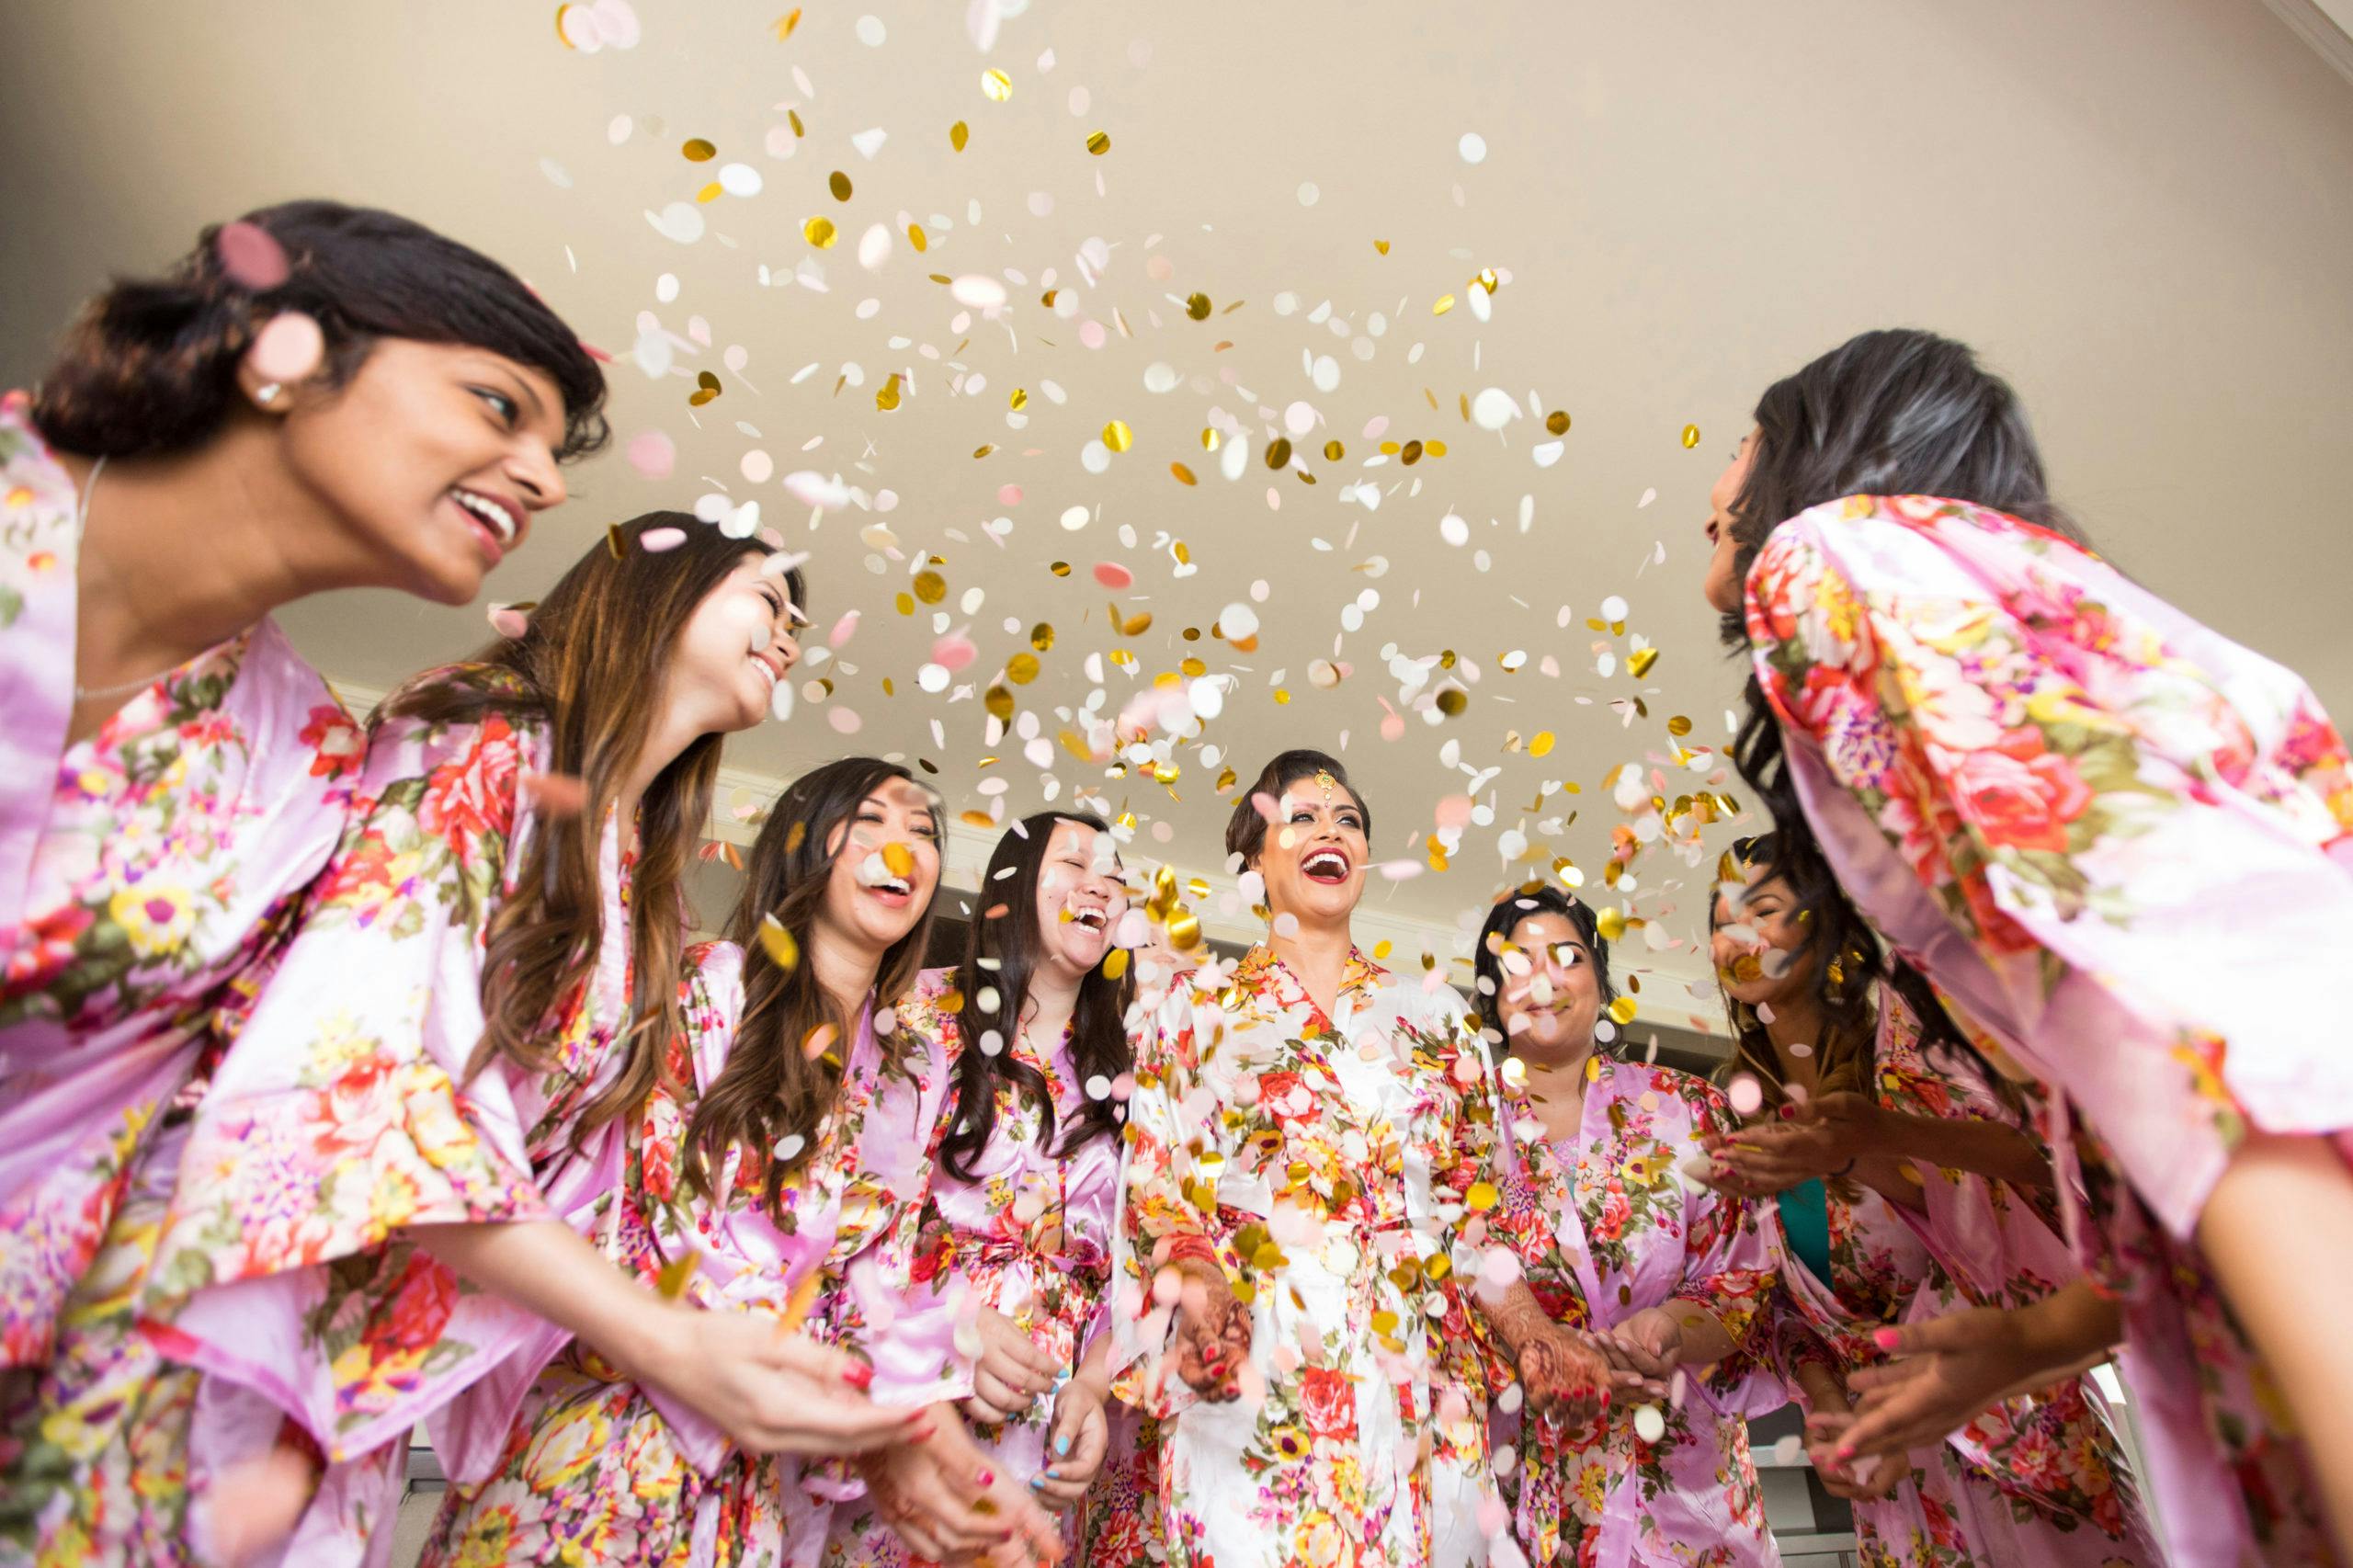 Bridesmaids huddled around in matching pajamas and confetti thrown in air | PartySlate